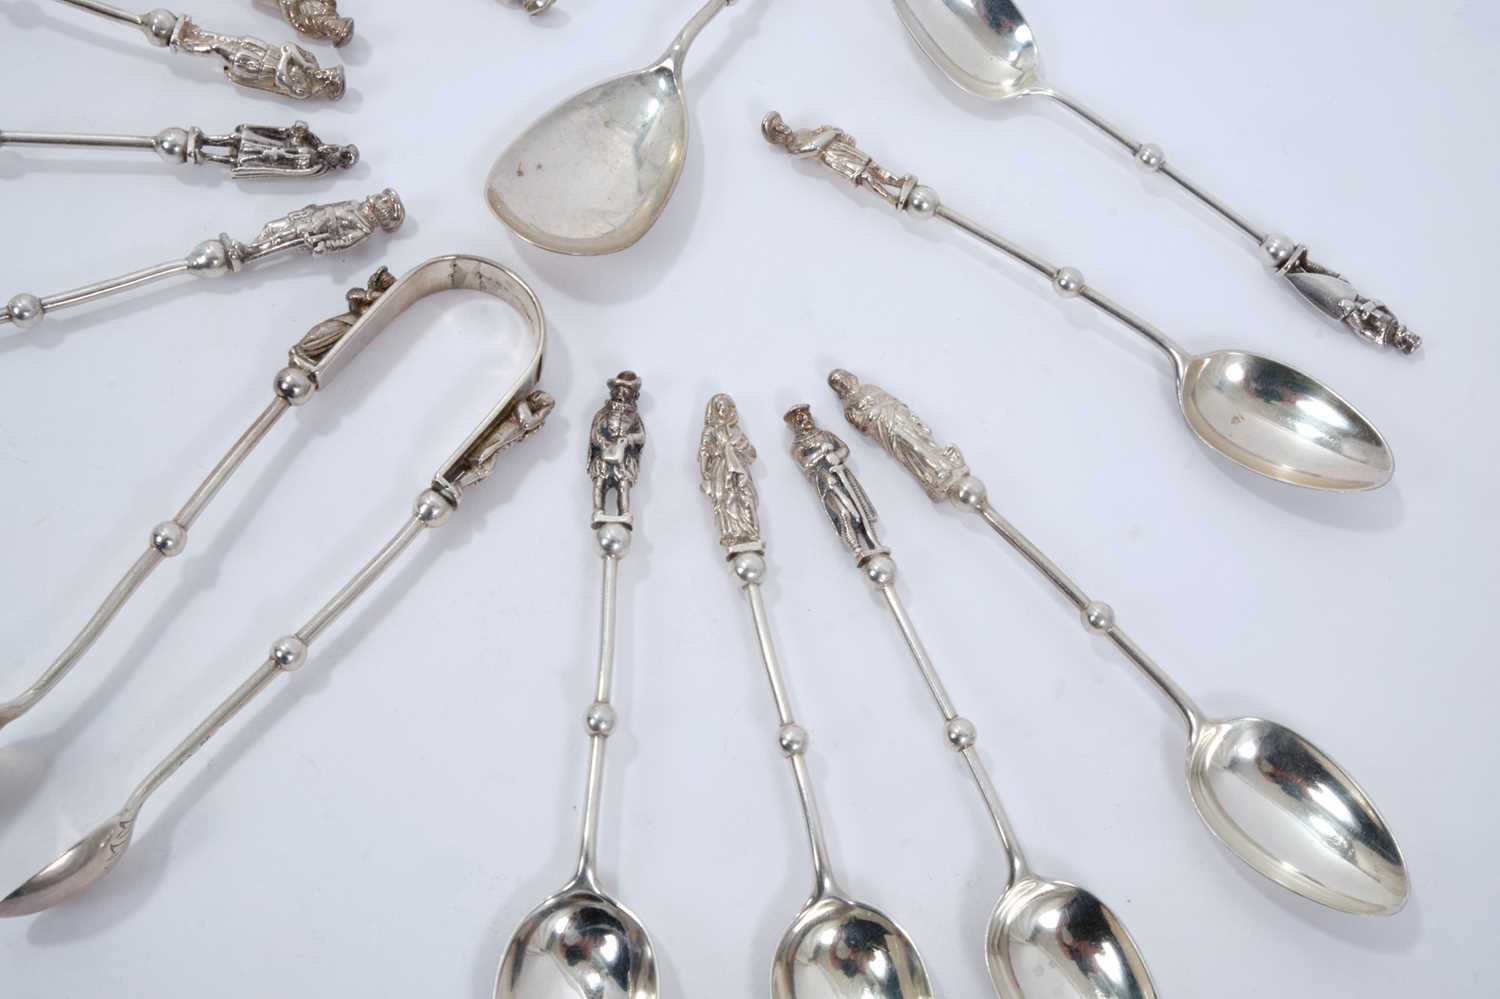 Unusual Victorian silver set of Sir Walter Scott character spoons - Image 2 of 6